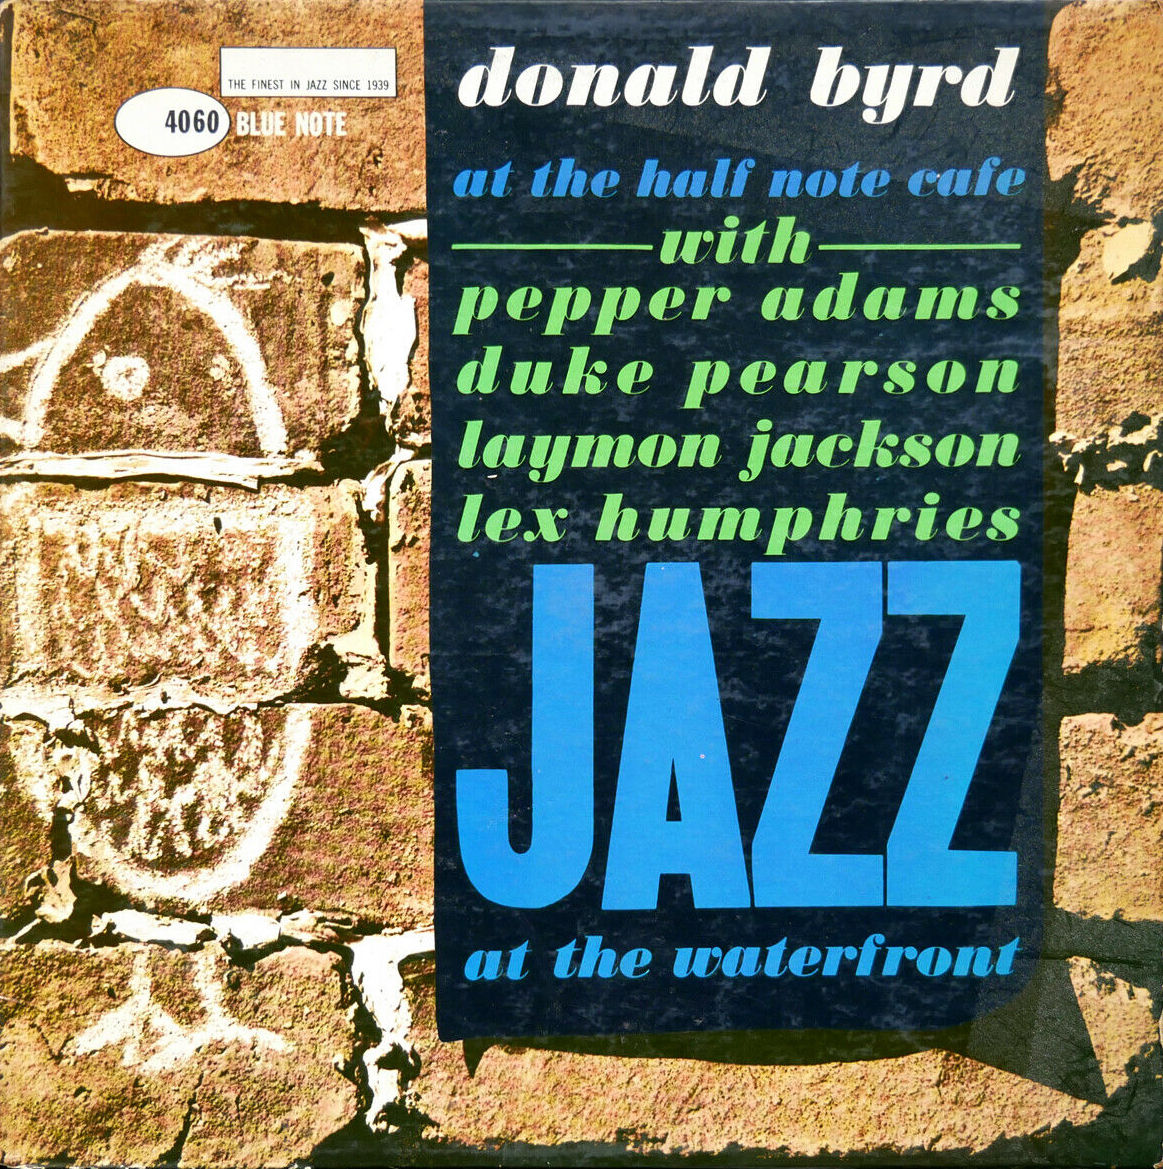 Donald Byrd - At The Half Note Volume 1